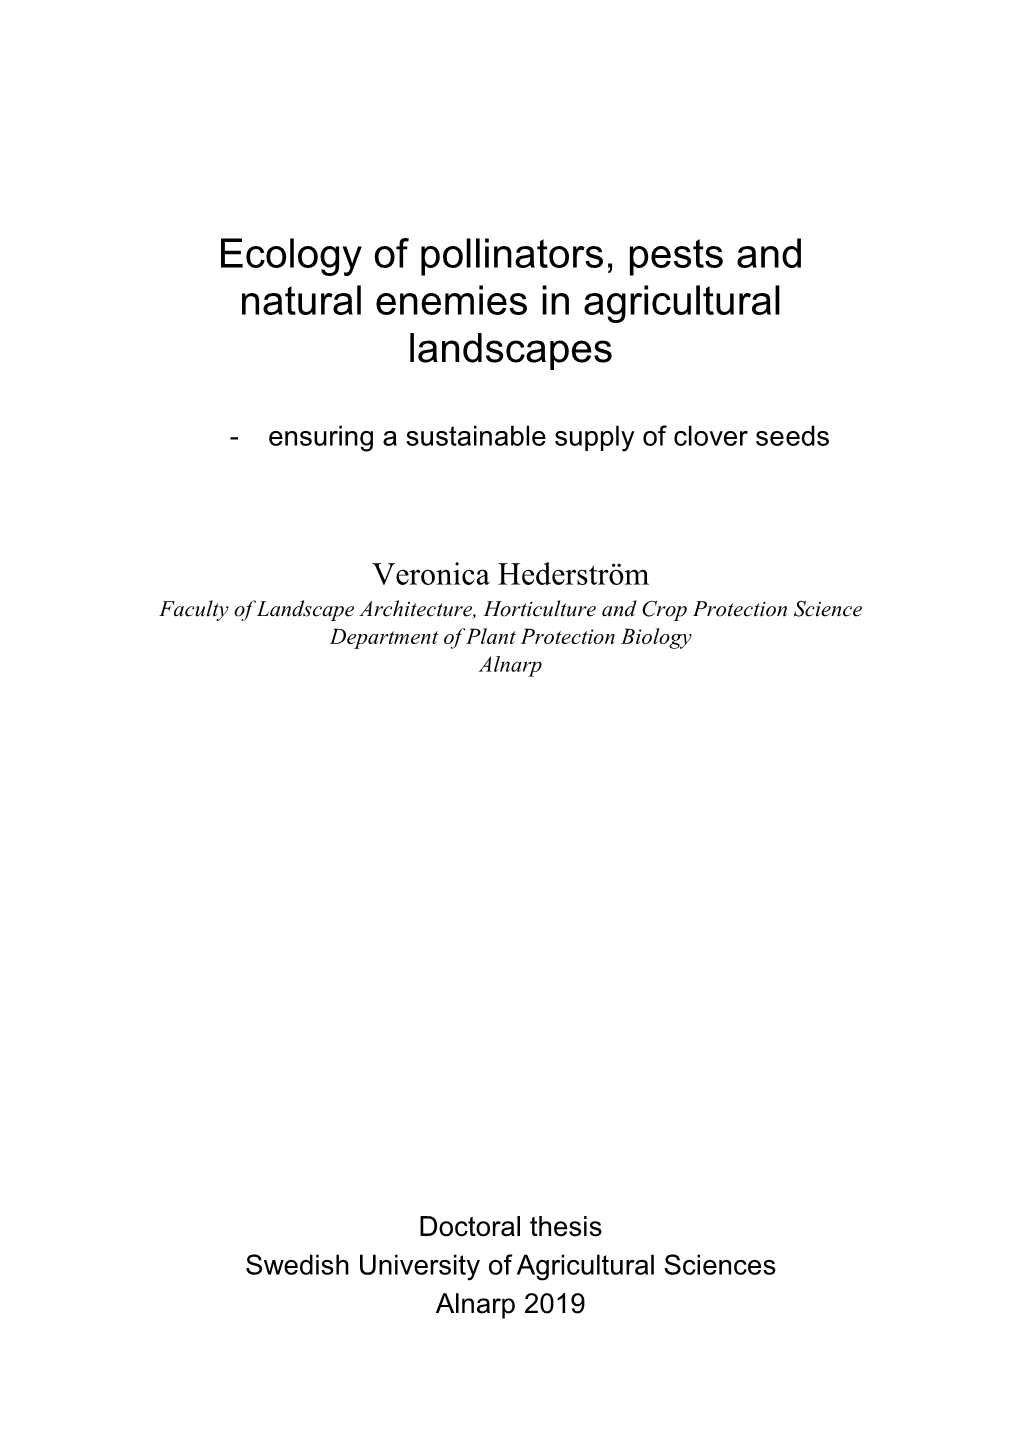 Ecology of Pollinators, Pests and Natural Enemies in Agricultural Landscapes